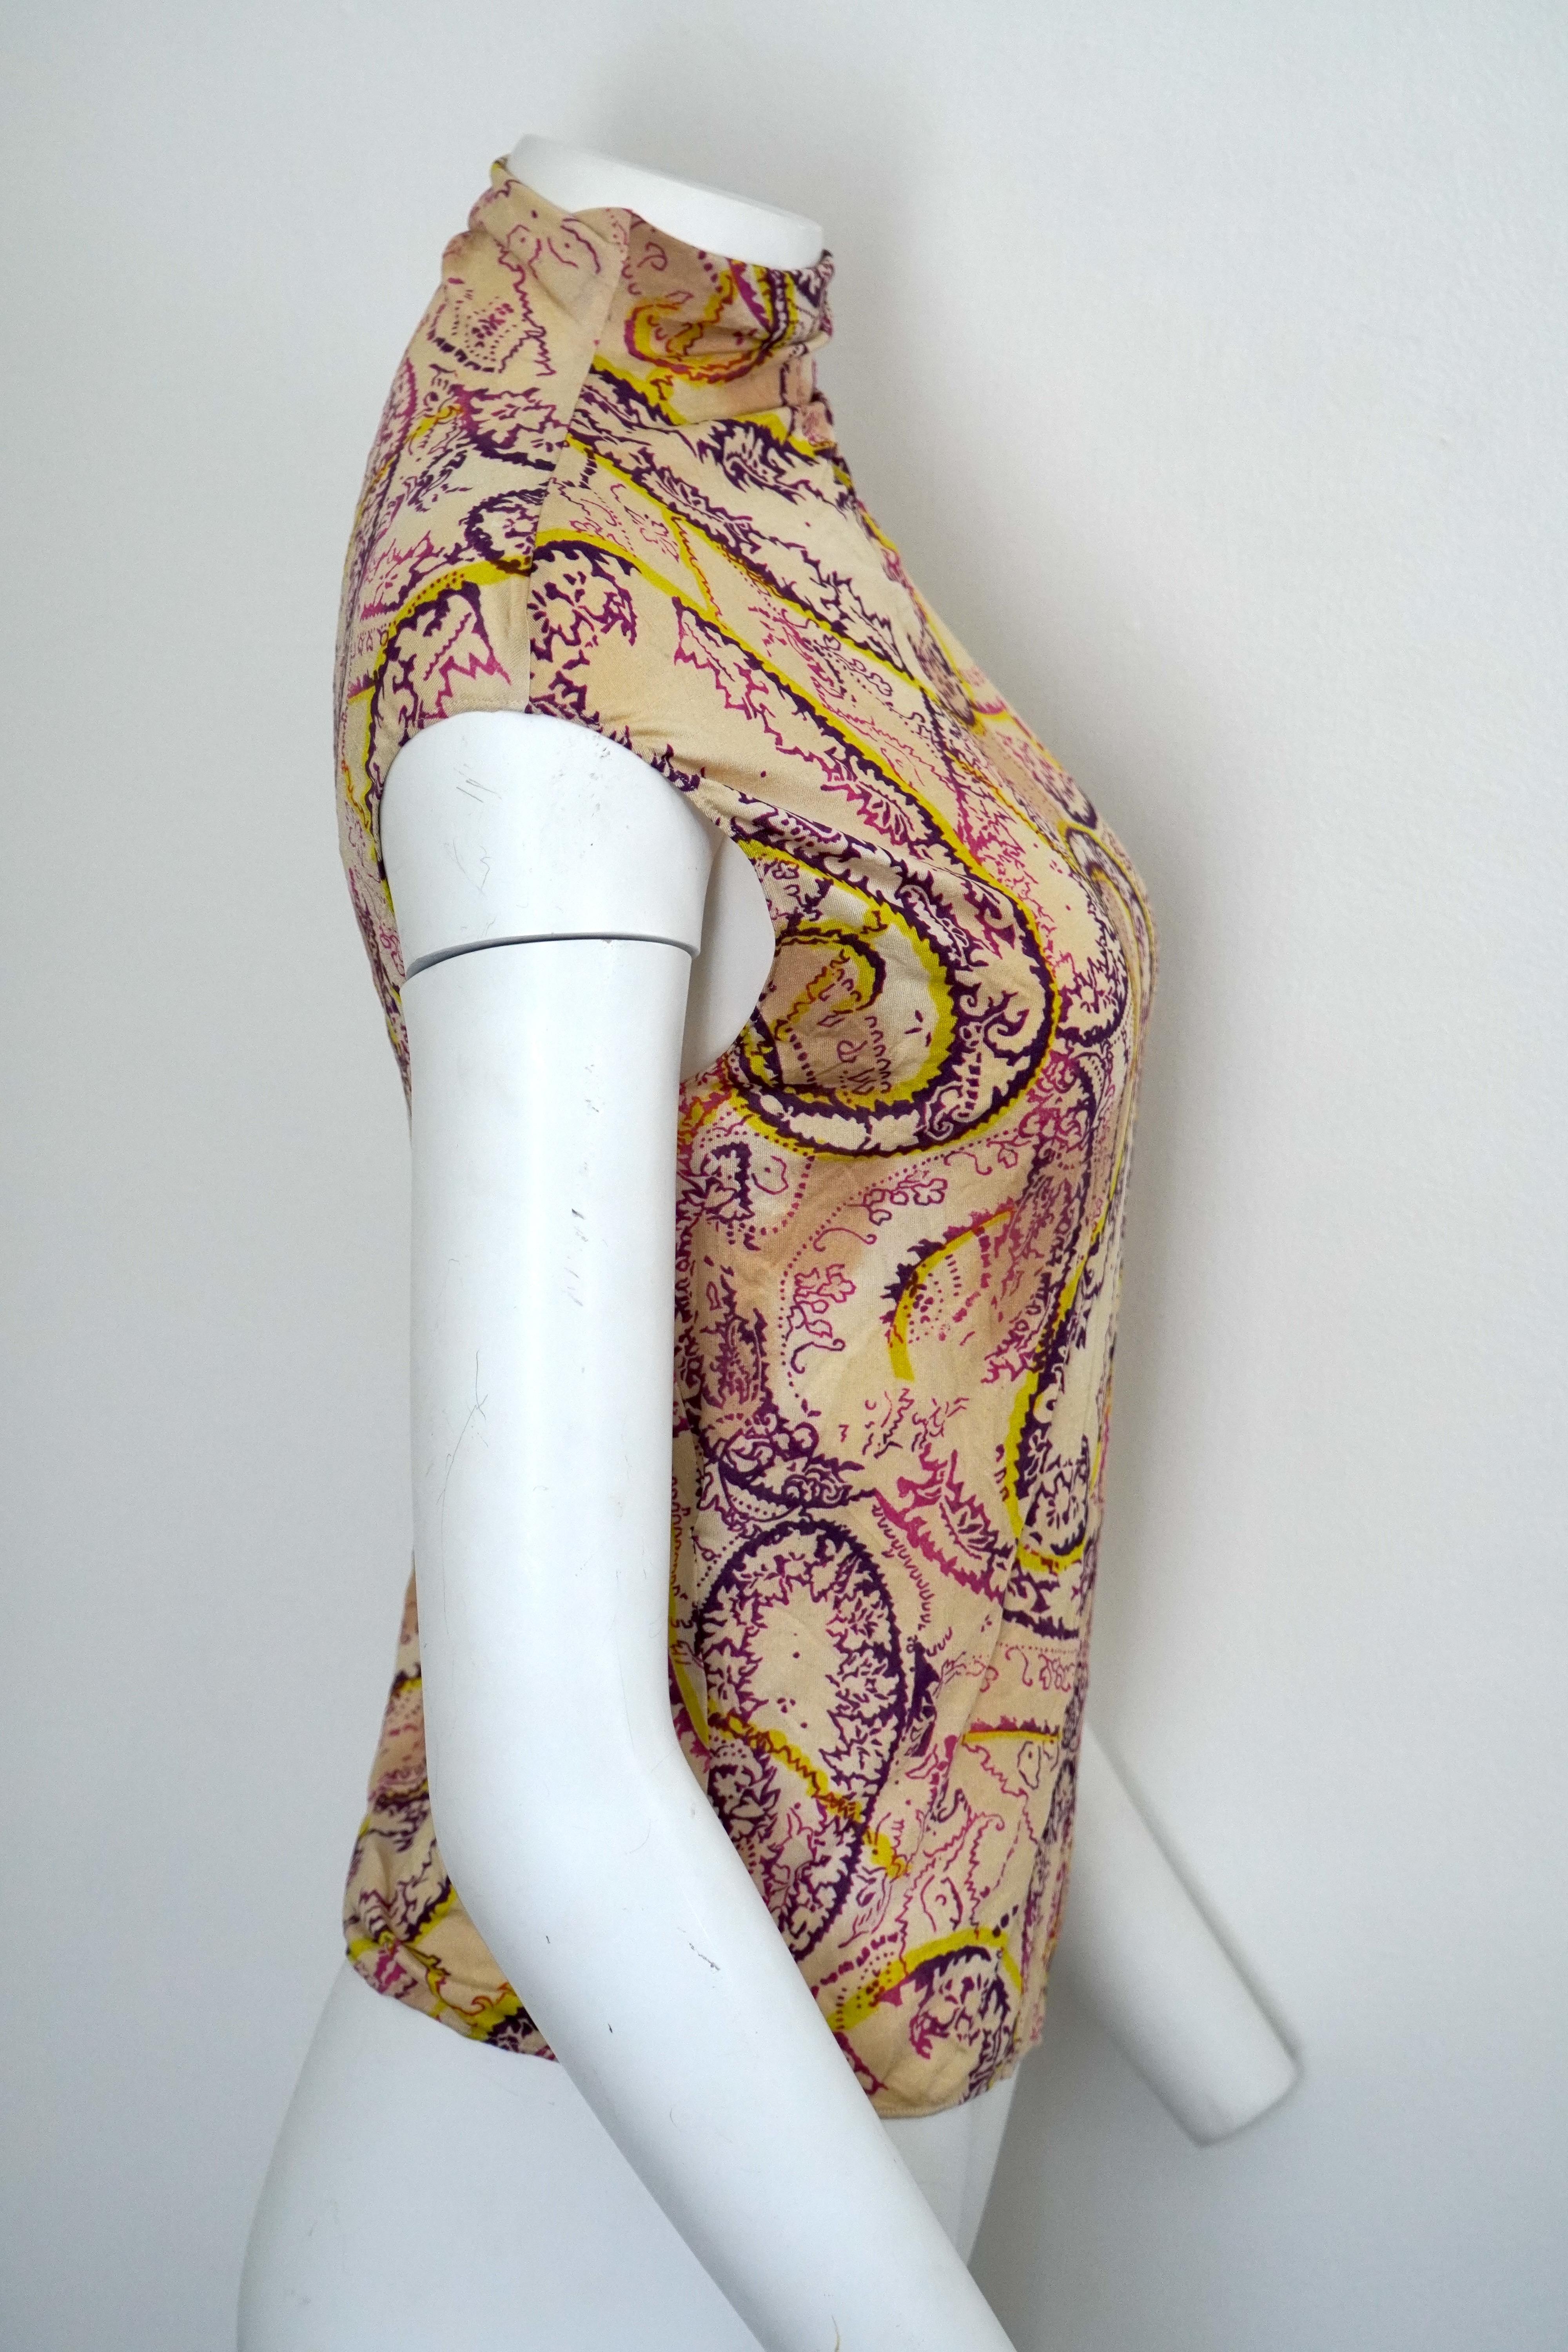 Emanuel Ungaro Sleeveless Mock Neck Paisley Top 
sz 38
Fabric has great stretch
Pink, purple, yellow, and cream paisley print
93% Rayon
7% Spandex
Dry clean only

Emanuel Ungaro was a French fashion designer of Italian descent, renowned for his bold